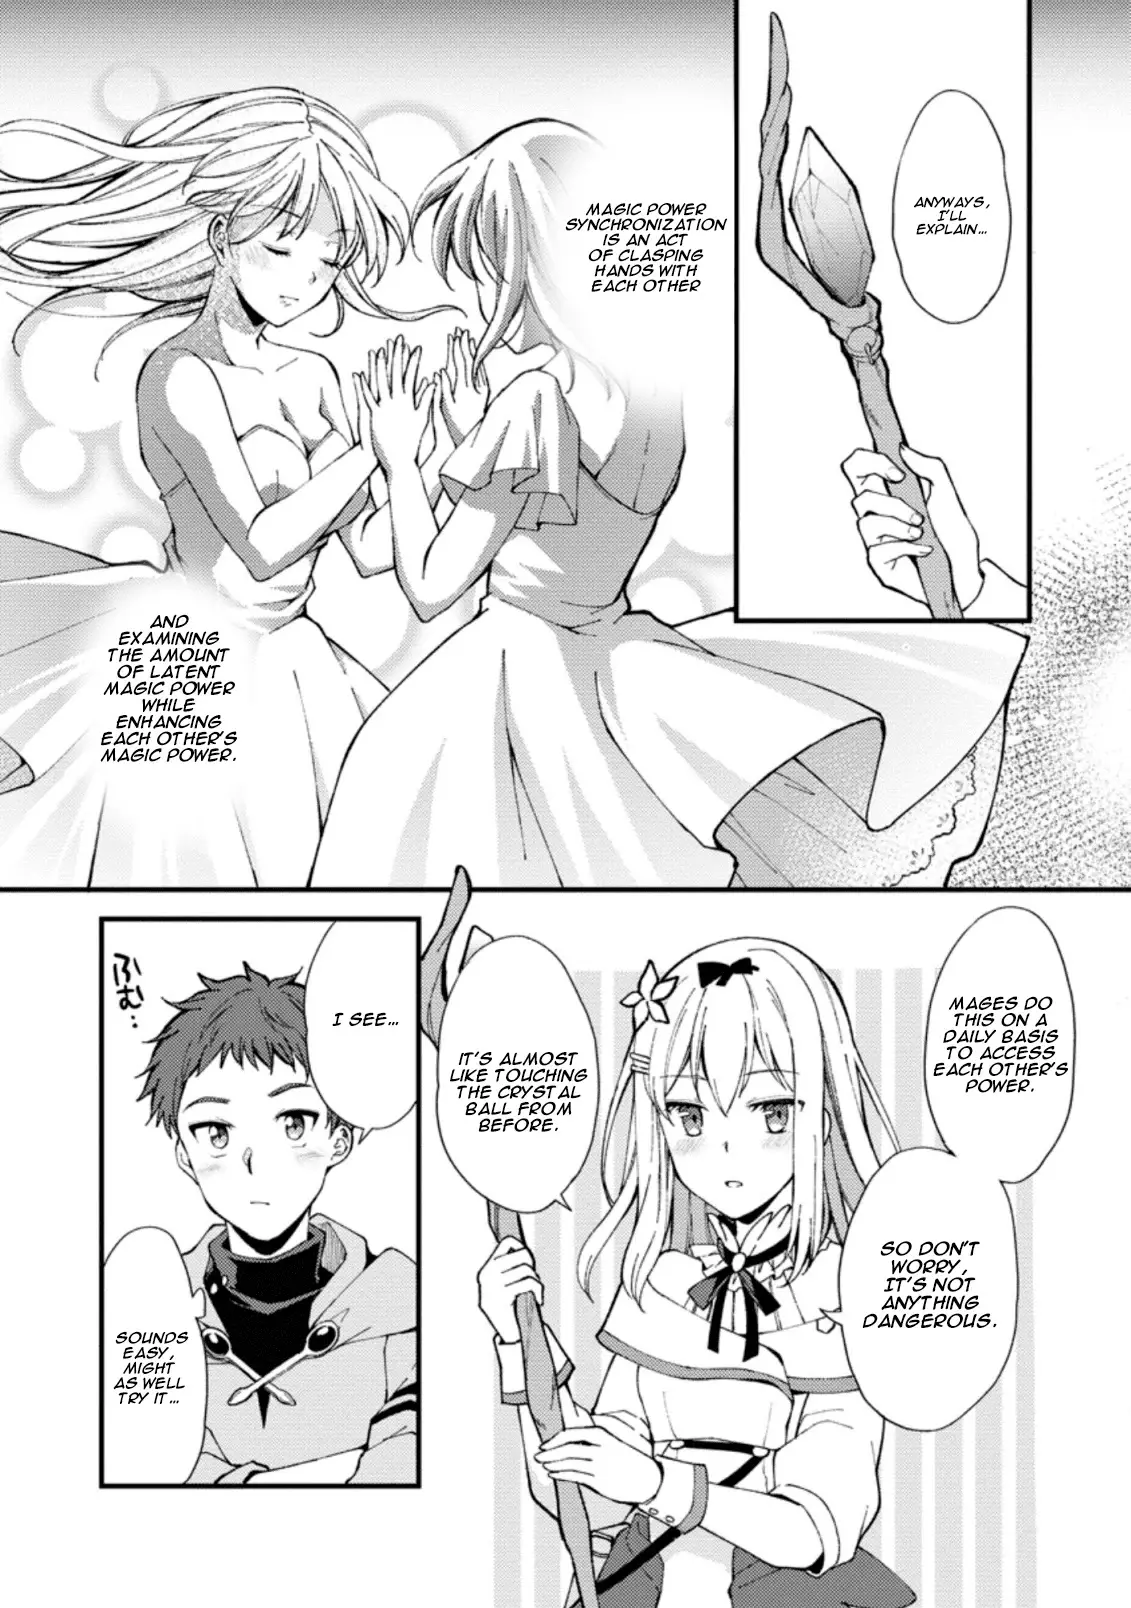 A Sword Master Childhood Friend Power Harassed Me Harshly, So I Broke Off Our Relationship And Make A Fresh Start At The Frontier As A Magic Swordsman. - 1 page 26